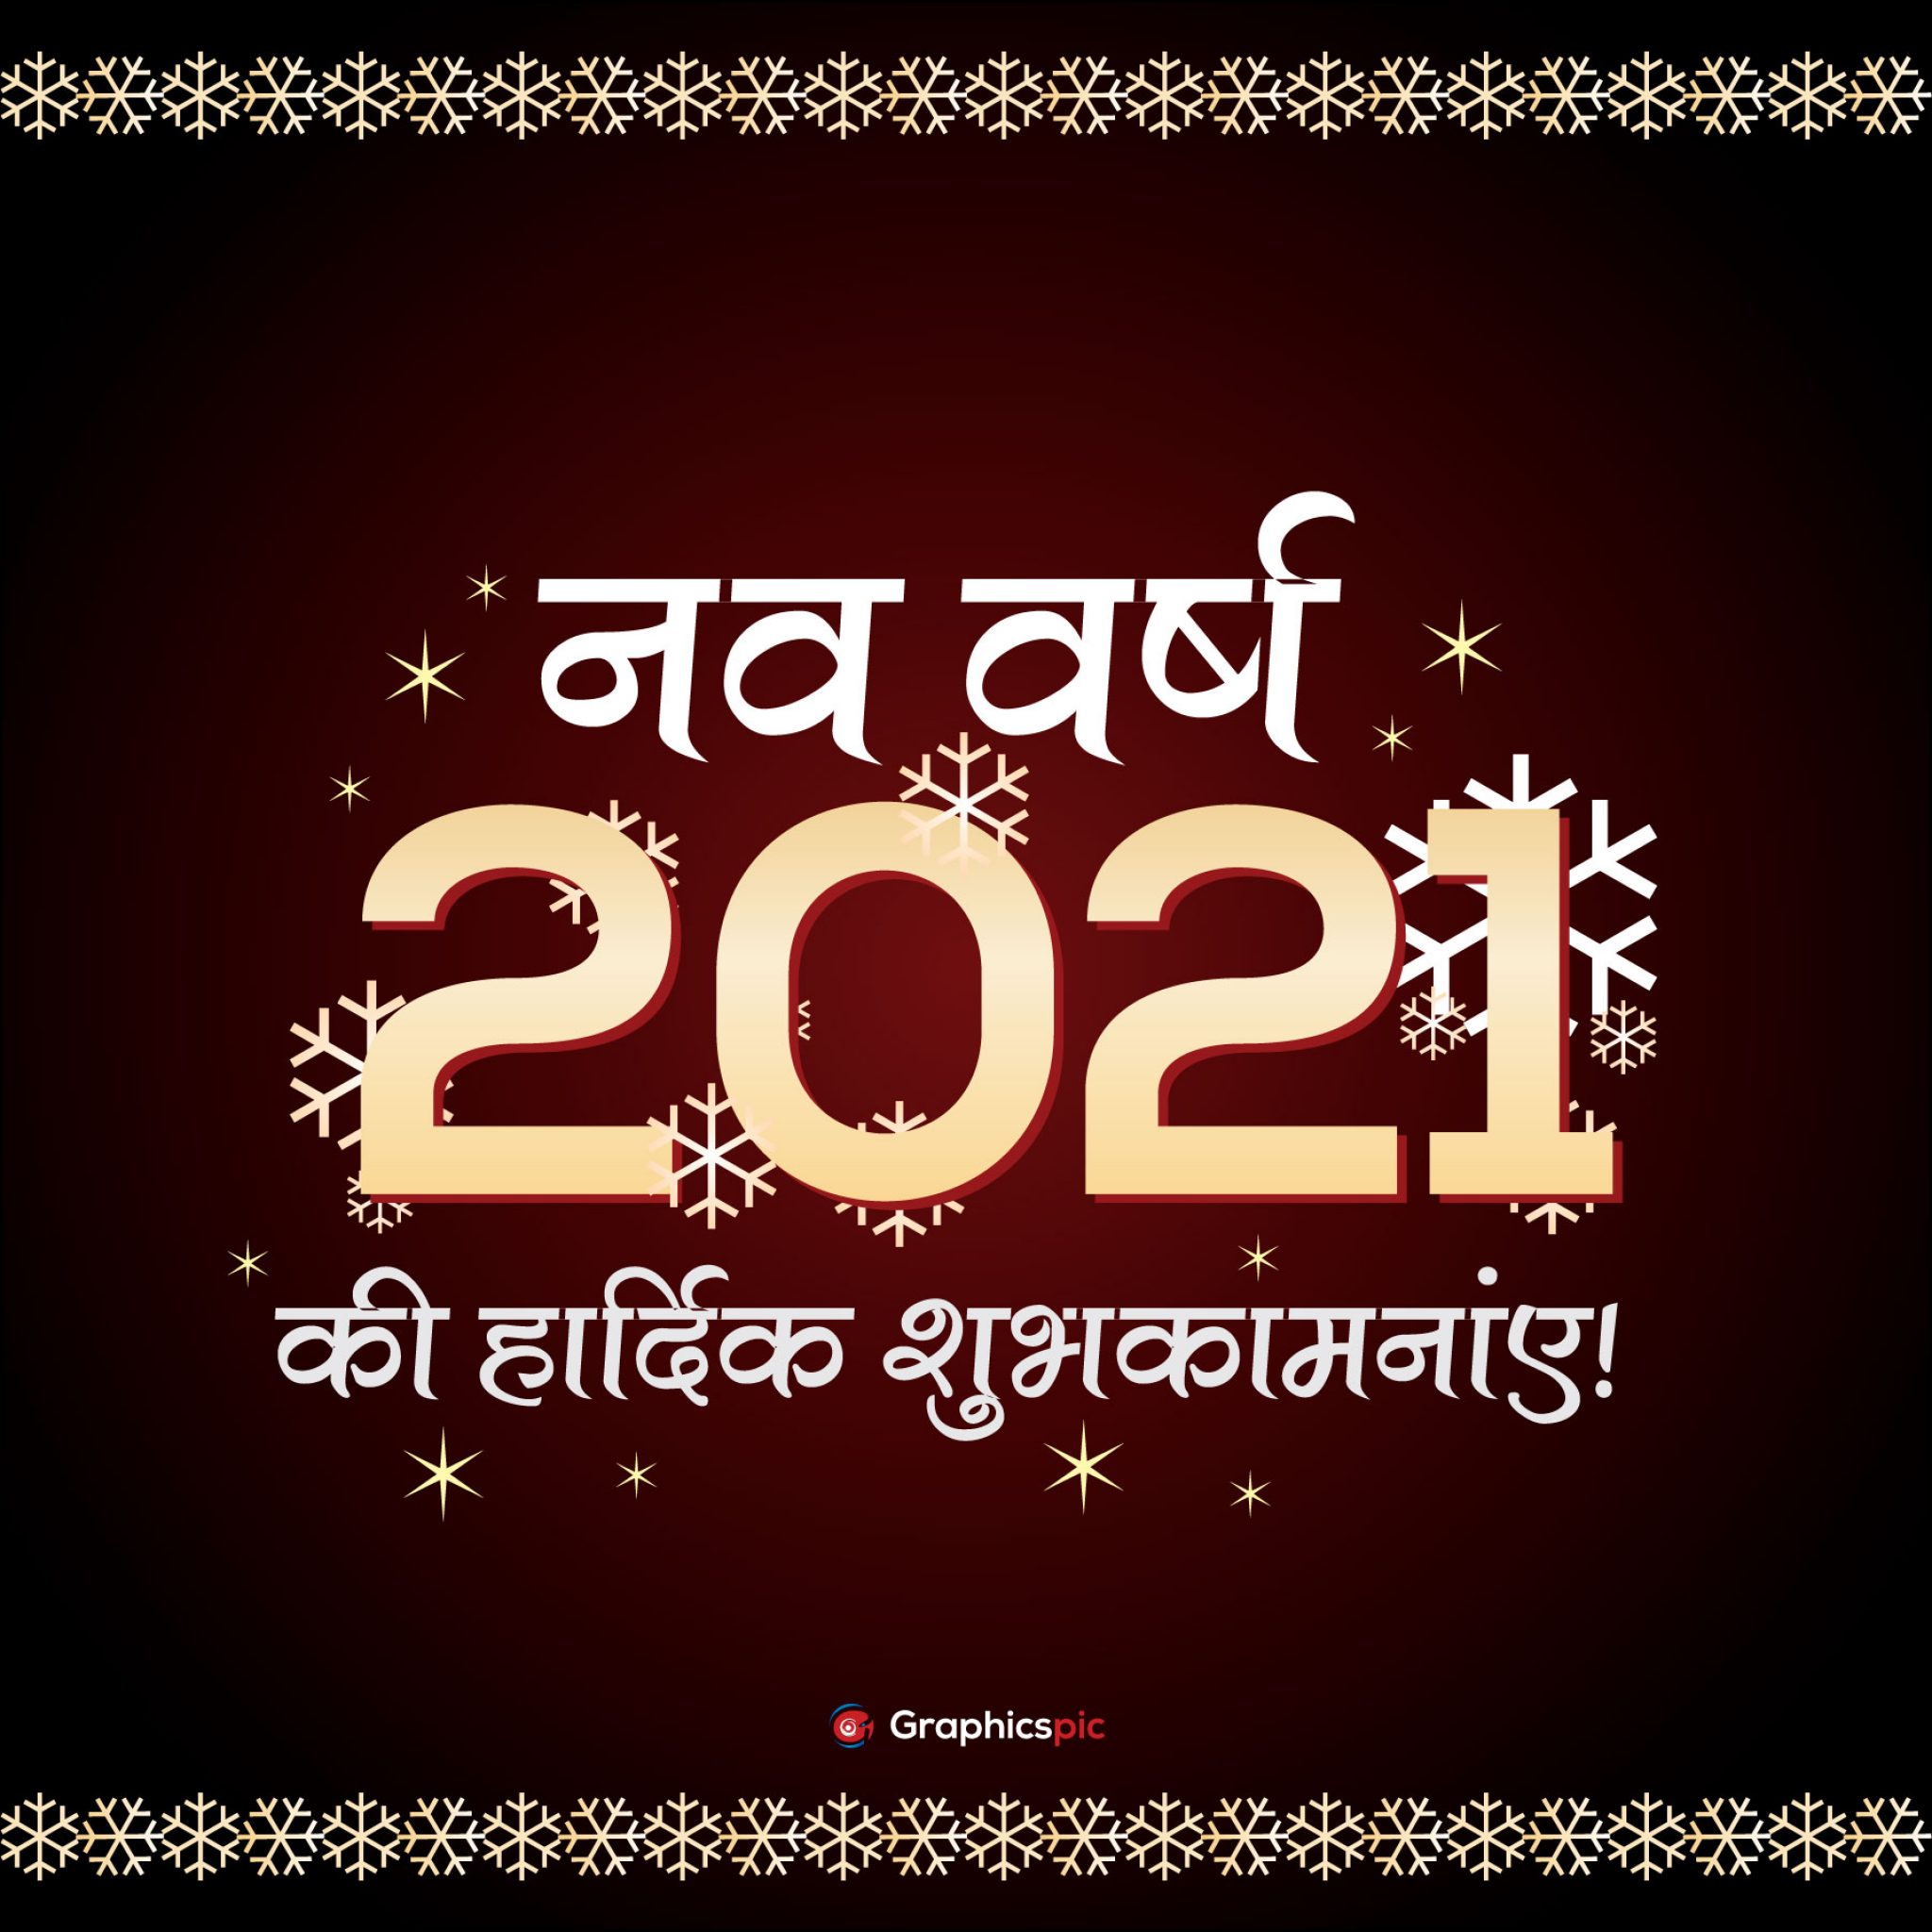 Happy new year 2021 banner in hindi – free vector - Graphics Pic